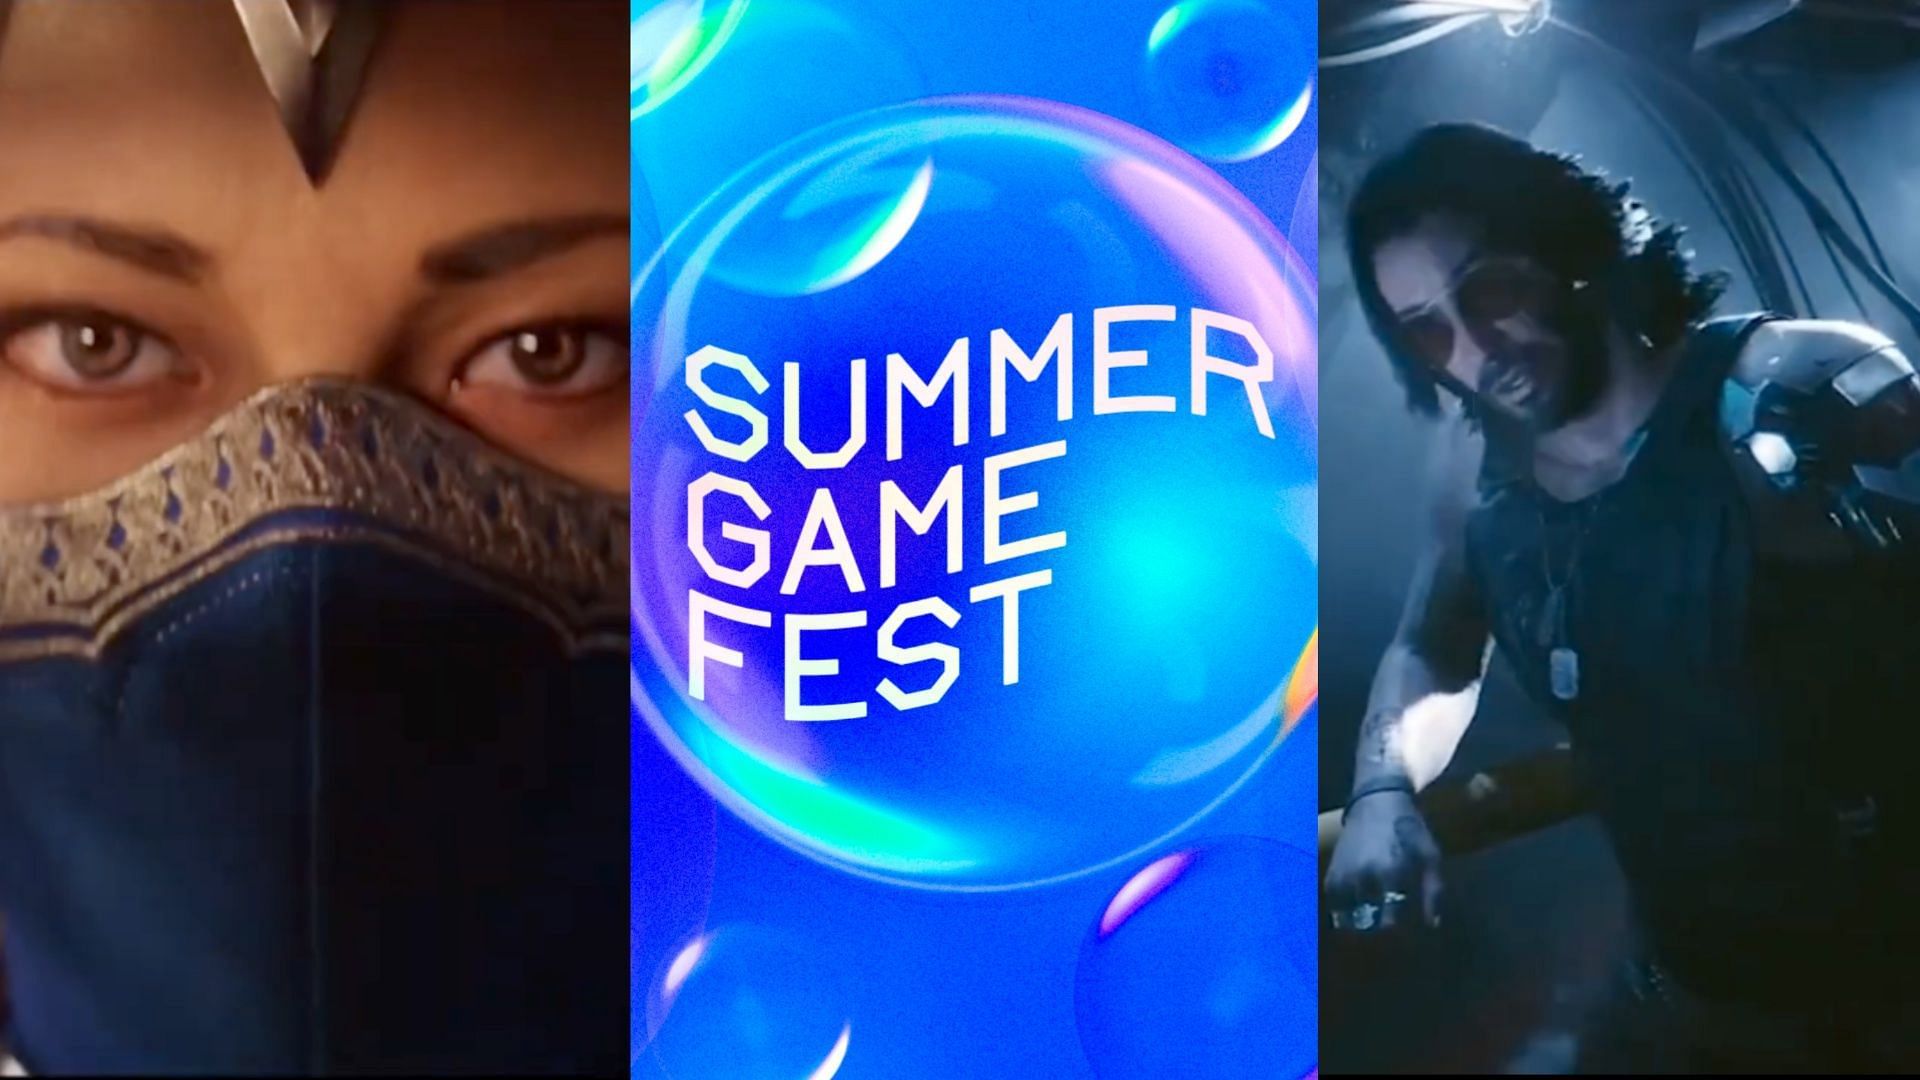 Summer gaming events 2023: Xbox Games Showcase, Summer Game Fest